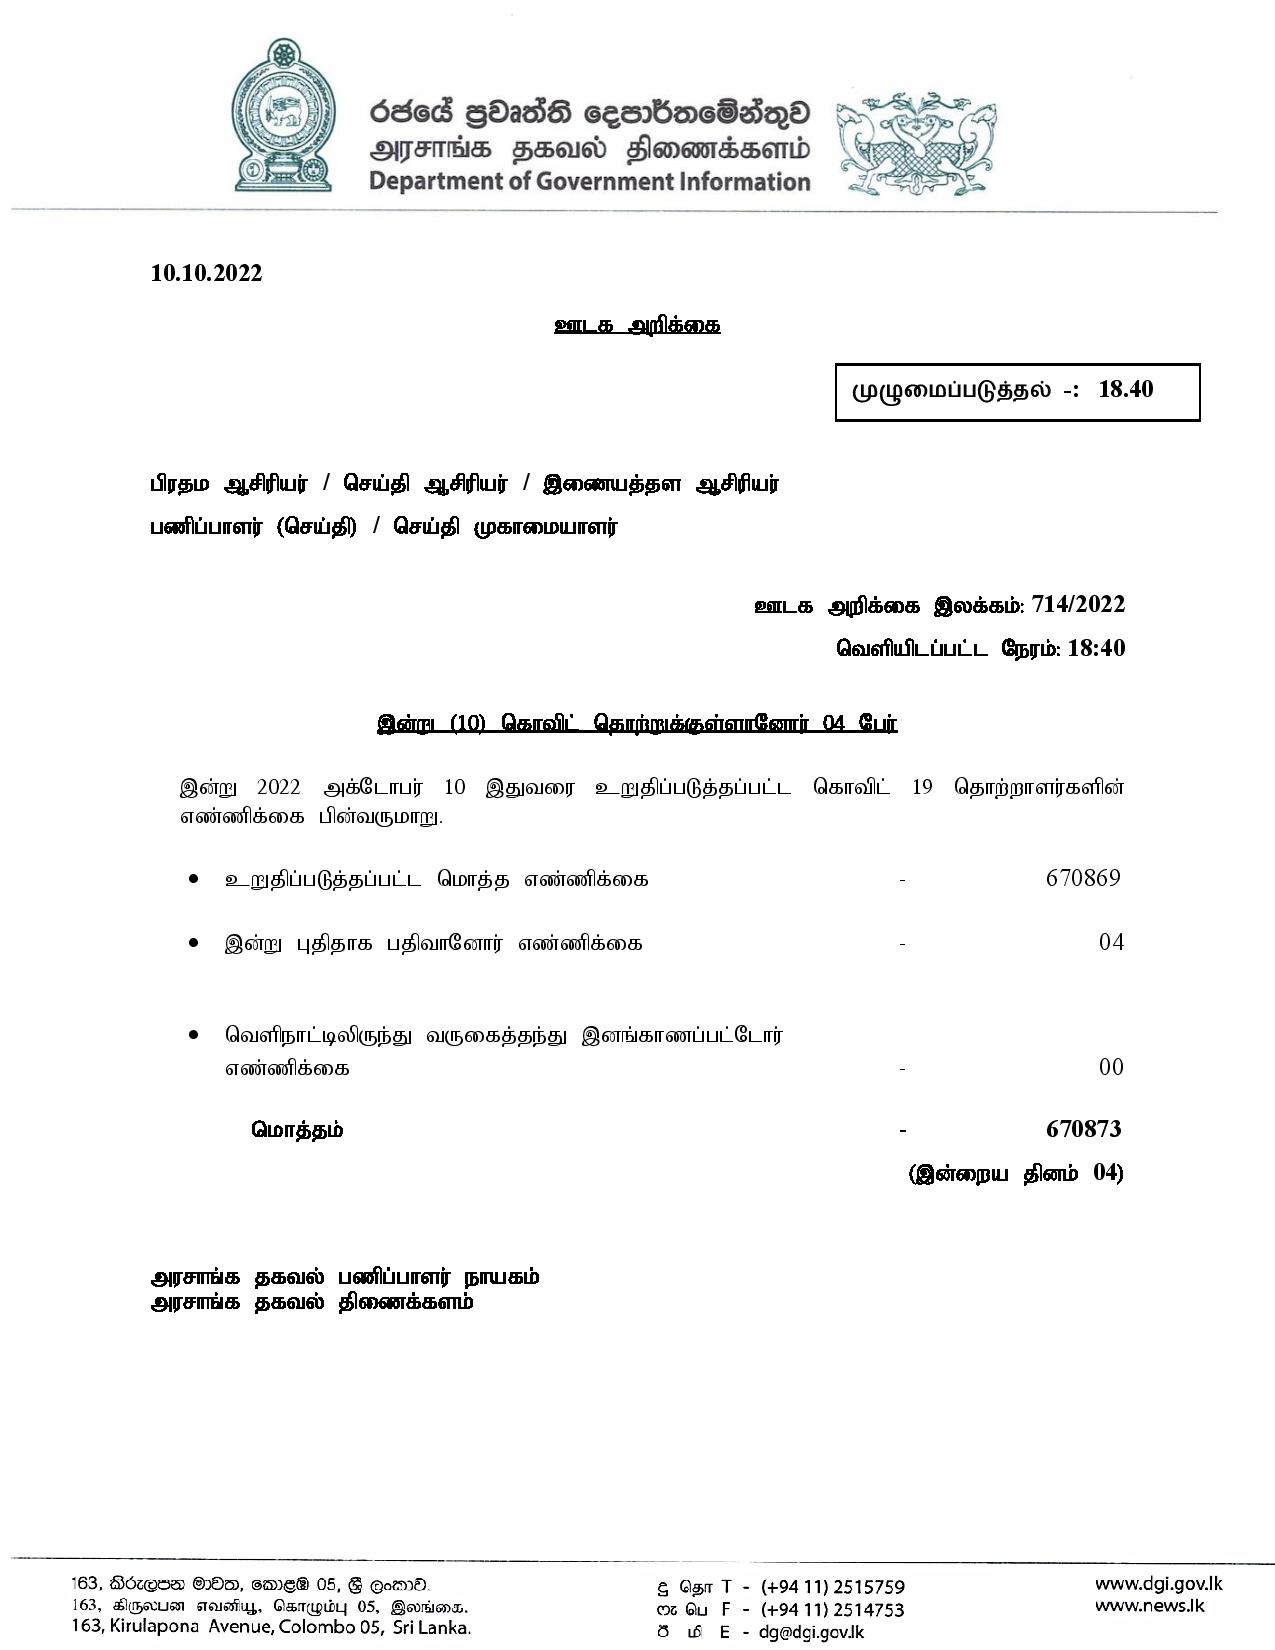 Release No 714 Tamil page 001